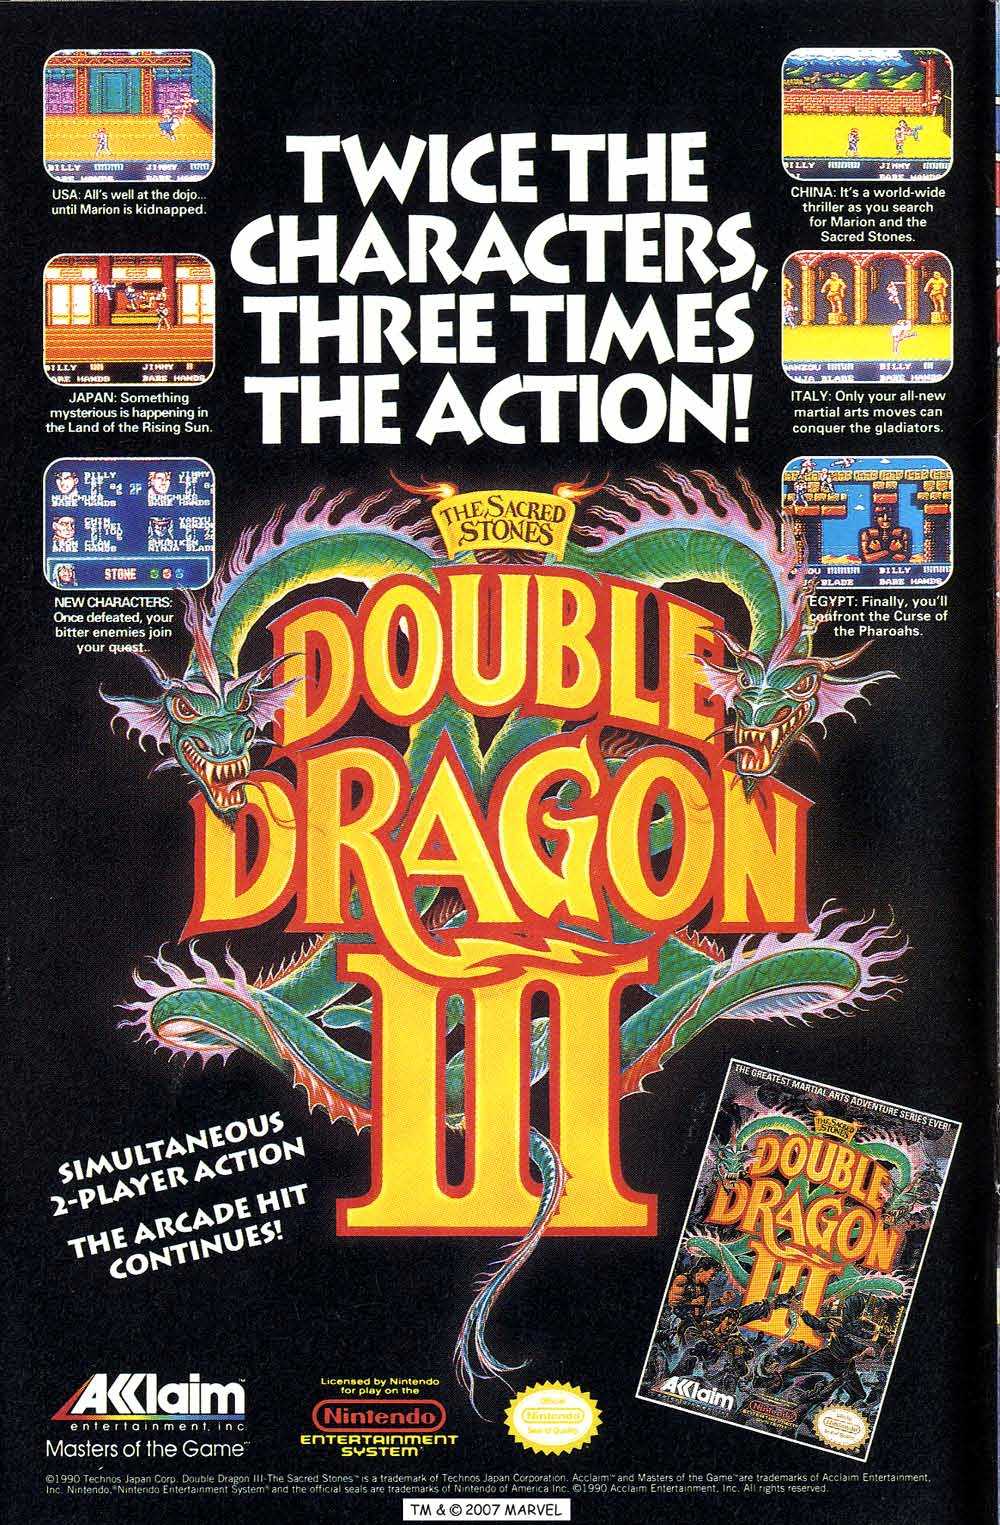 They left out “Four times as hard!” After the success of Double Dragon II: The Revenge on the NES, Technos decided to create an original version of Double Dragon III, […]